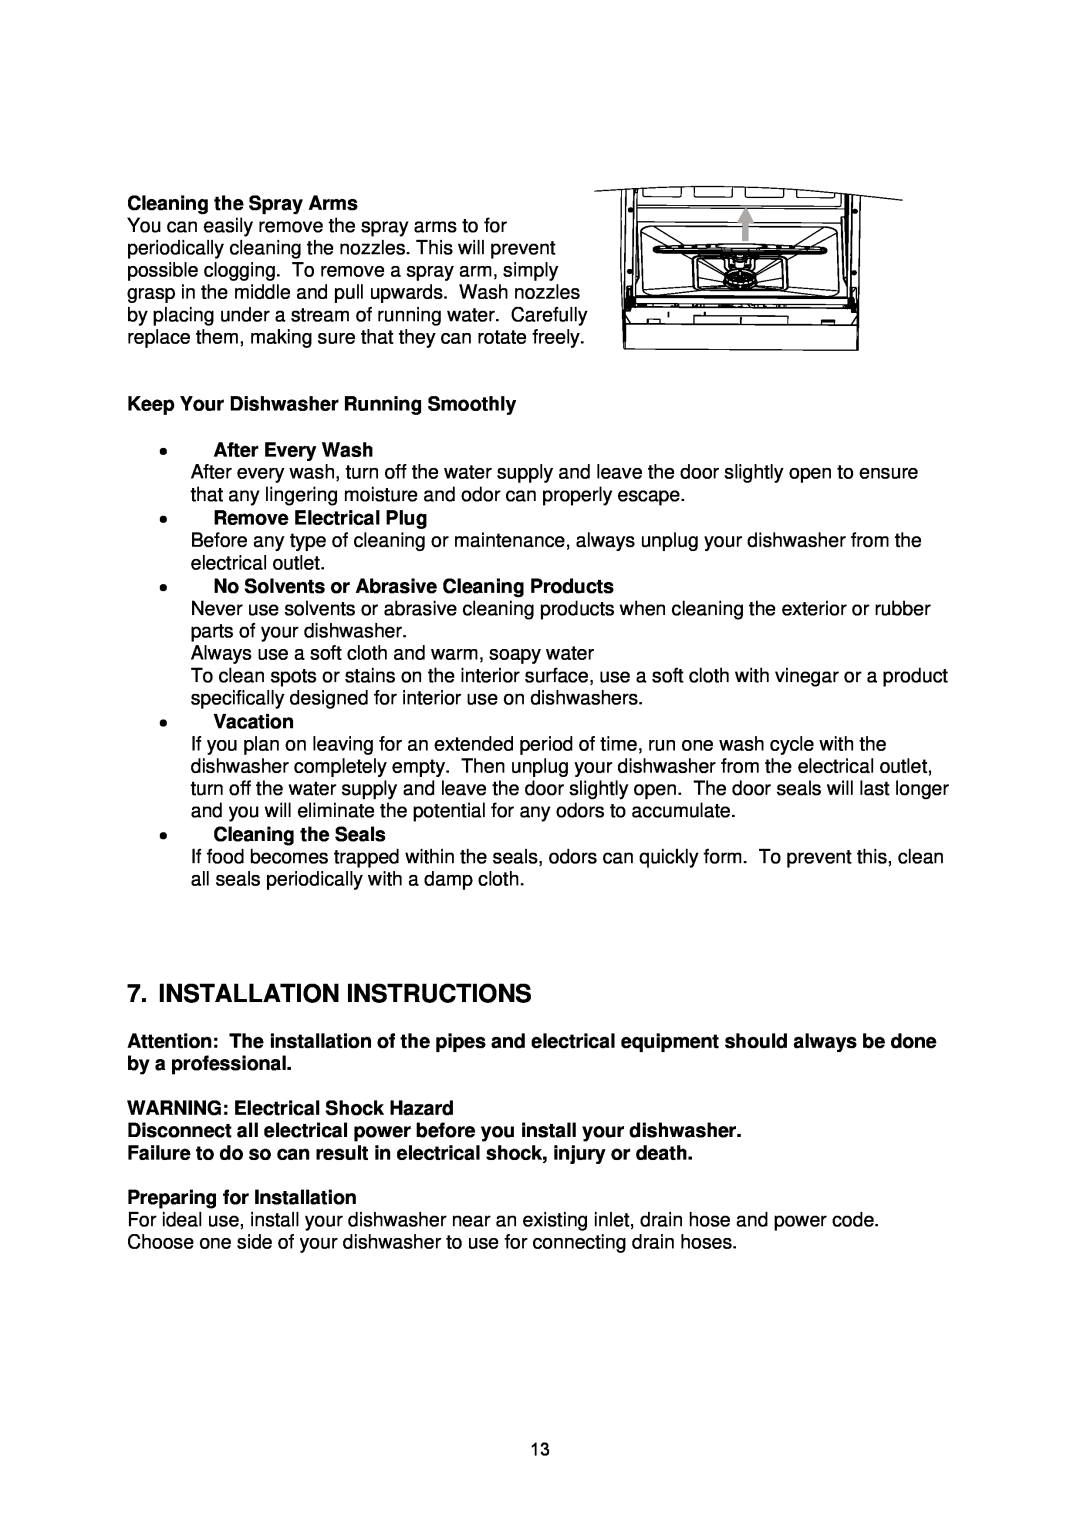 NewAir ADW-2600W Installation Instructions, Keep Your Dishwasher Running Smoothly After Every Wash, Remove Electrical Plug 